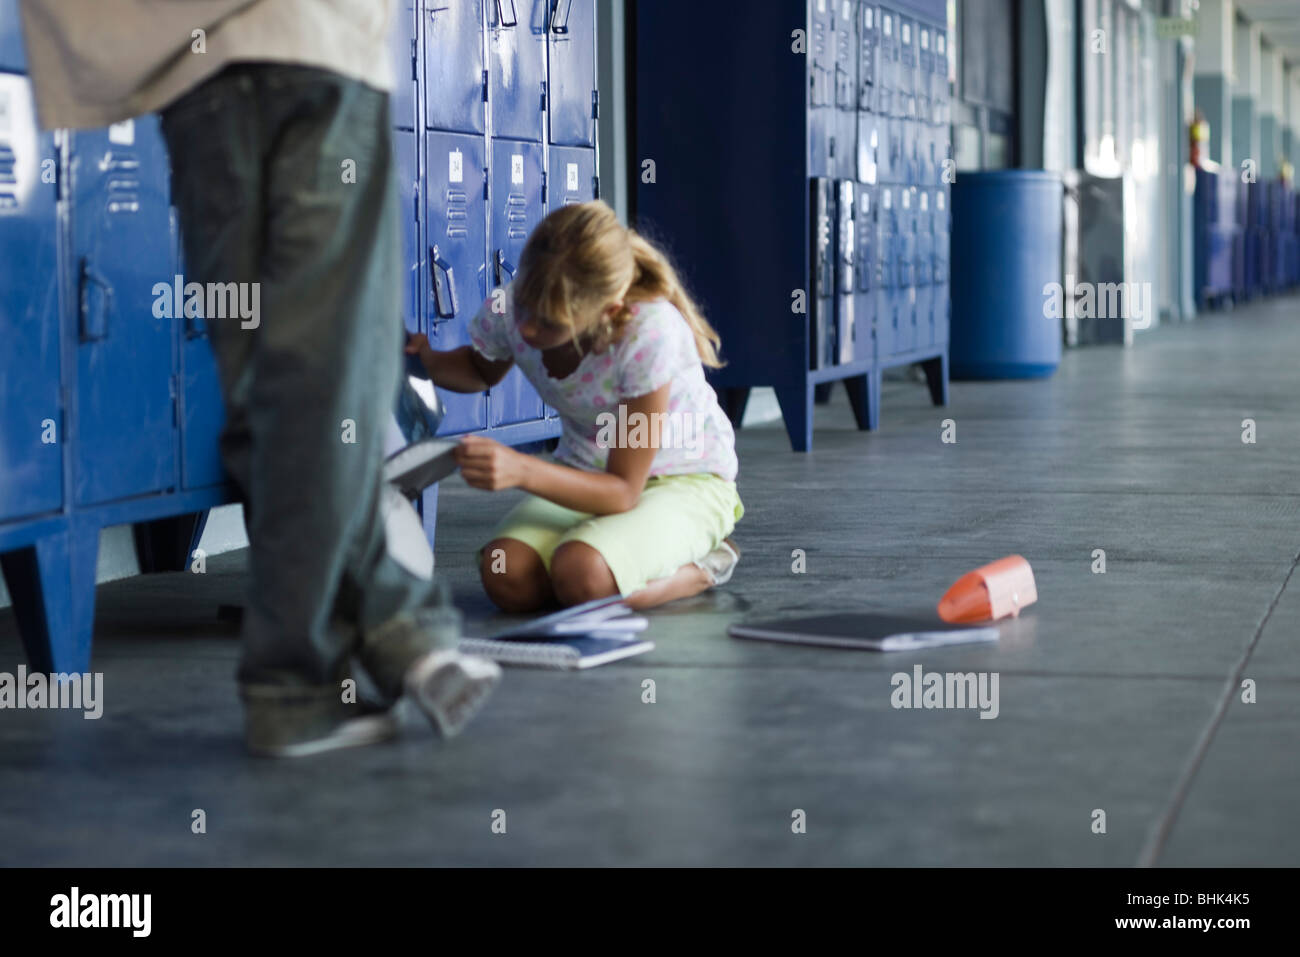 Junior high student picking up dropped school supplies, boy standing by watching Stock Photo